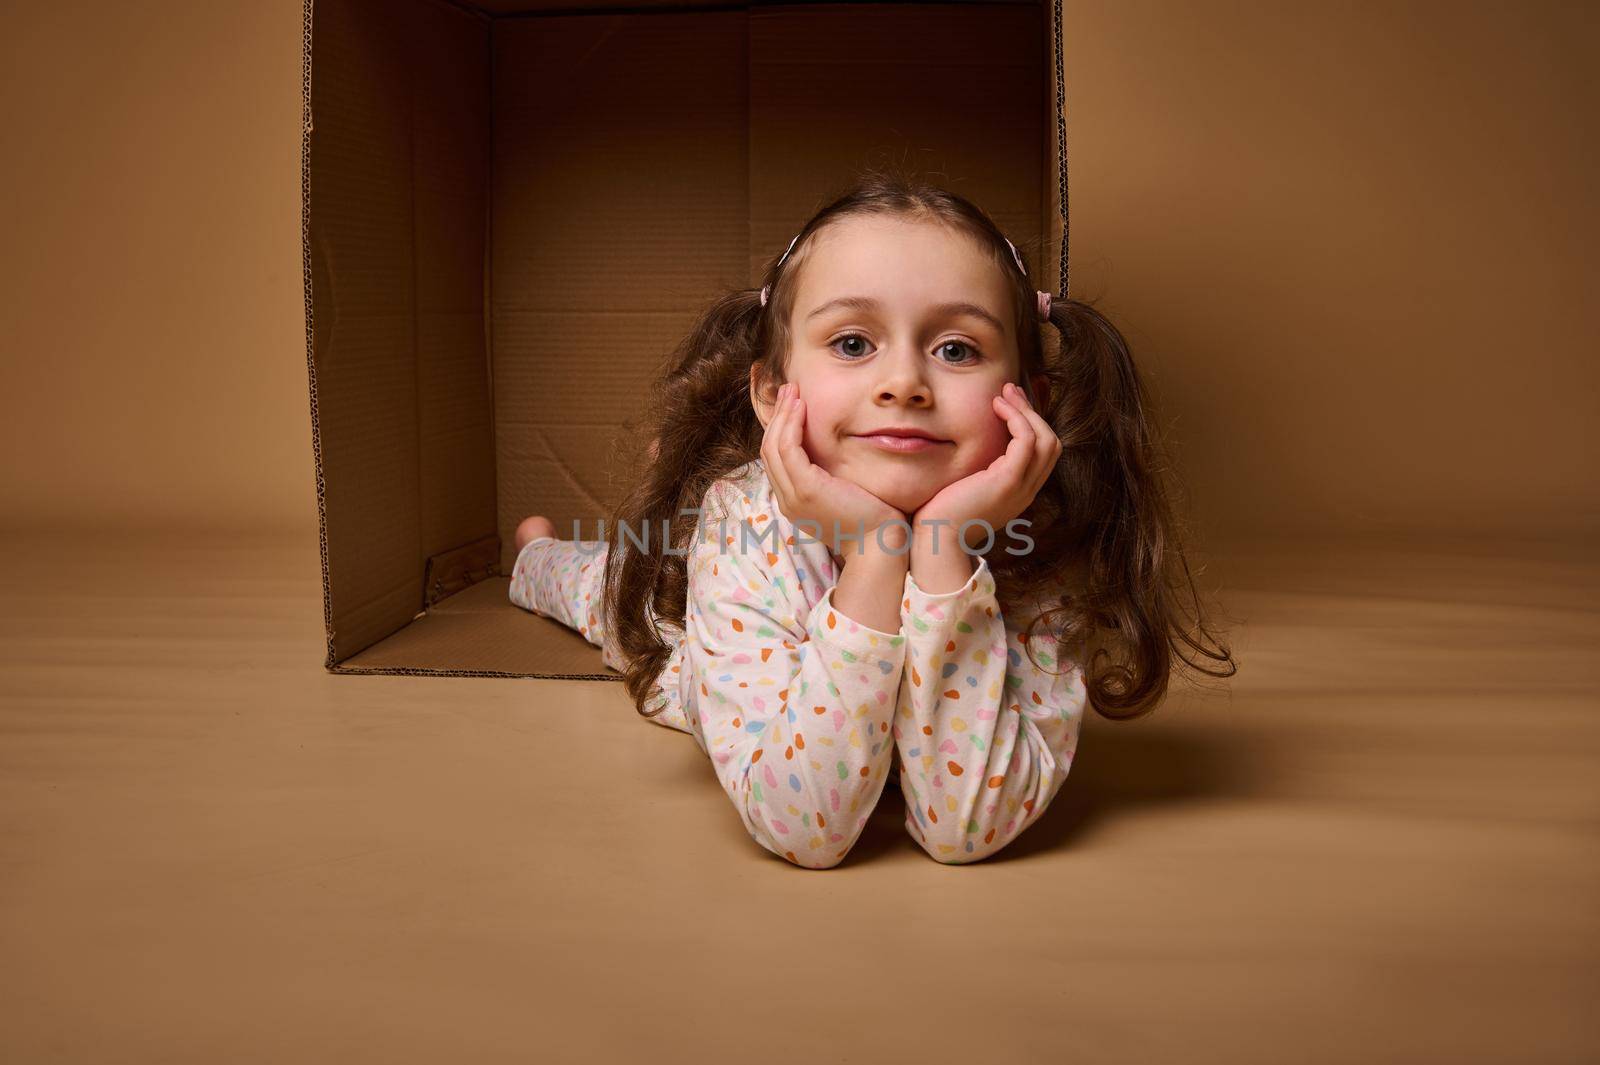 Smiling beautiful positive pleasant baby girlin pajamas with two ponytails inside a cardboard box, looking at camera isolated over beige background with copy space for ads